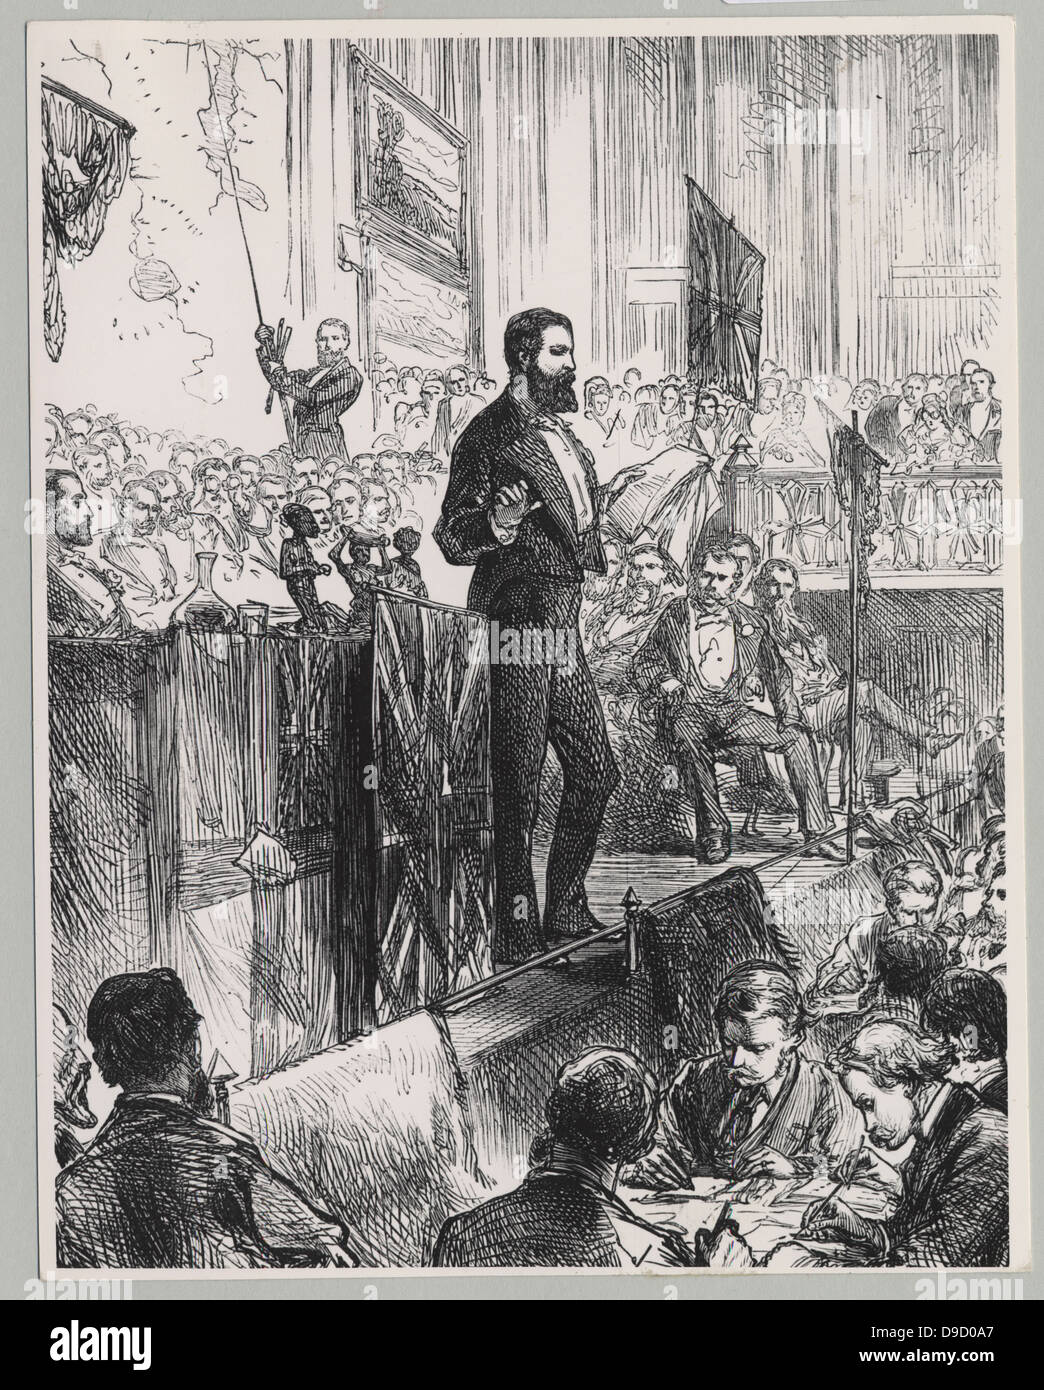 Veerney Lovett Cameron (1844-1904) British traveller and explorer, addressing the Royal Geographical Society in London on his return from his African expedition 1872-1875. Engraving April 1876. Stock Photo